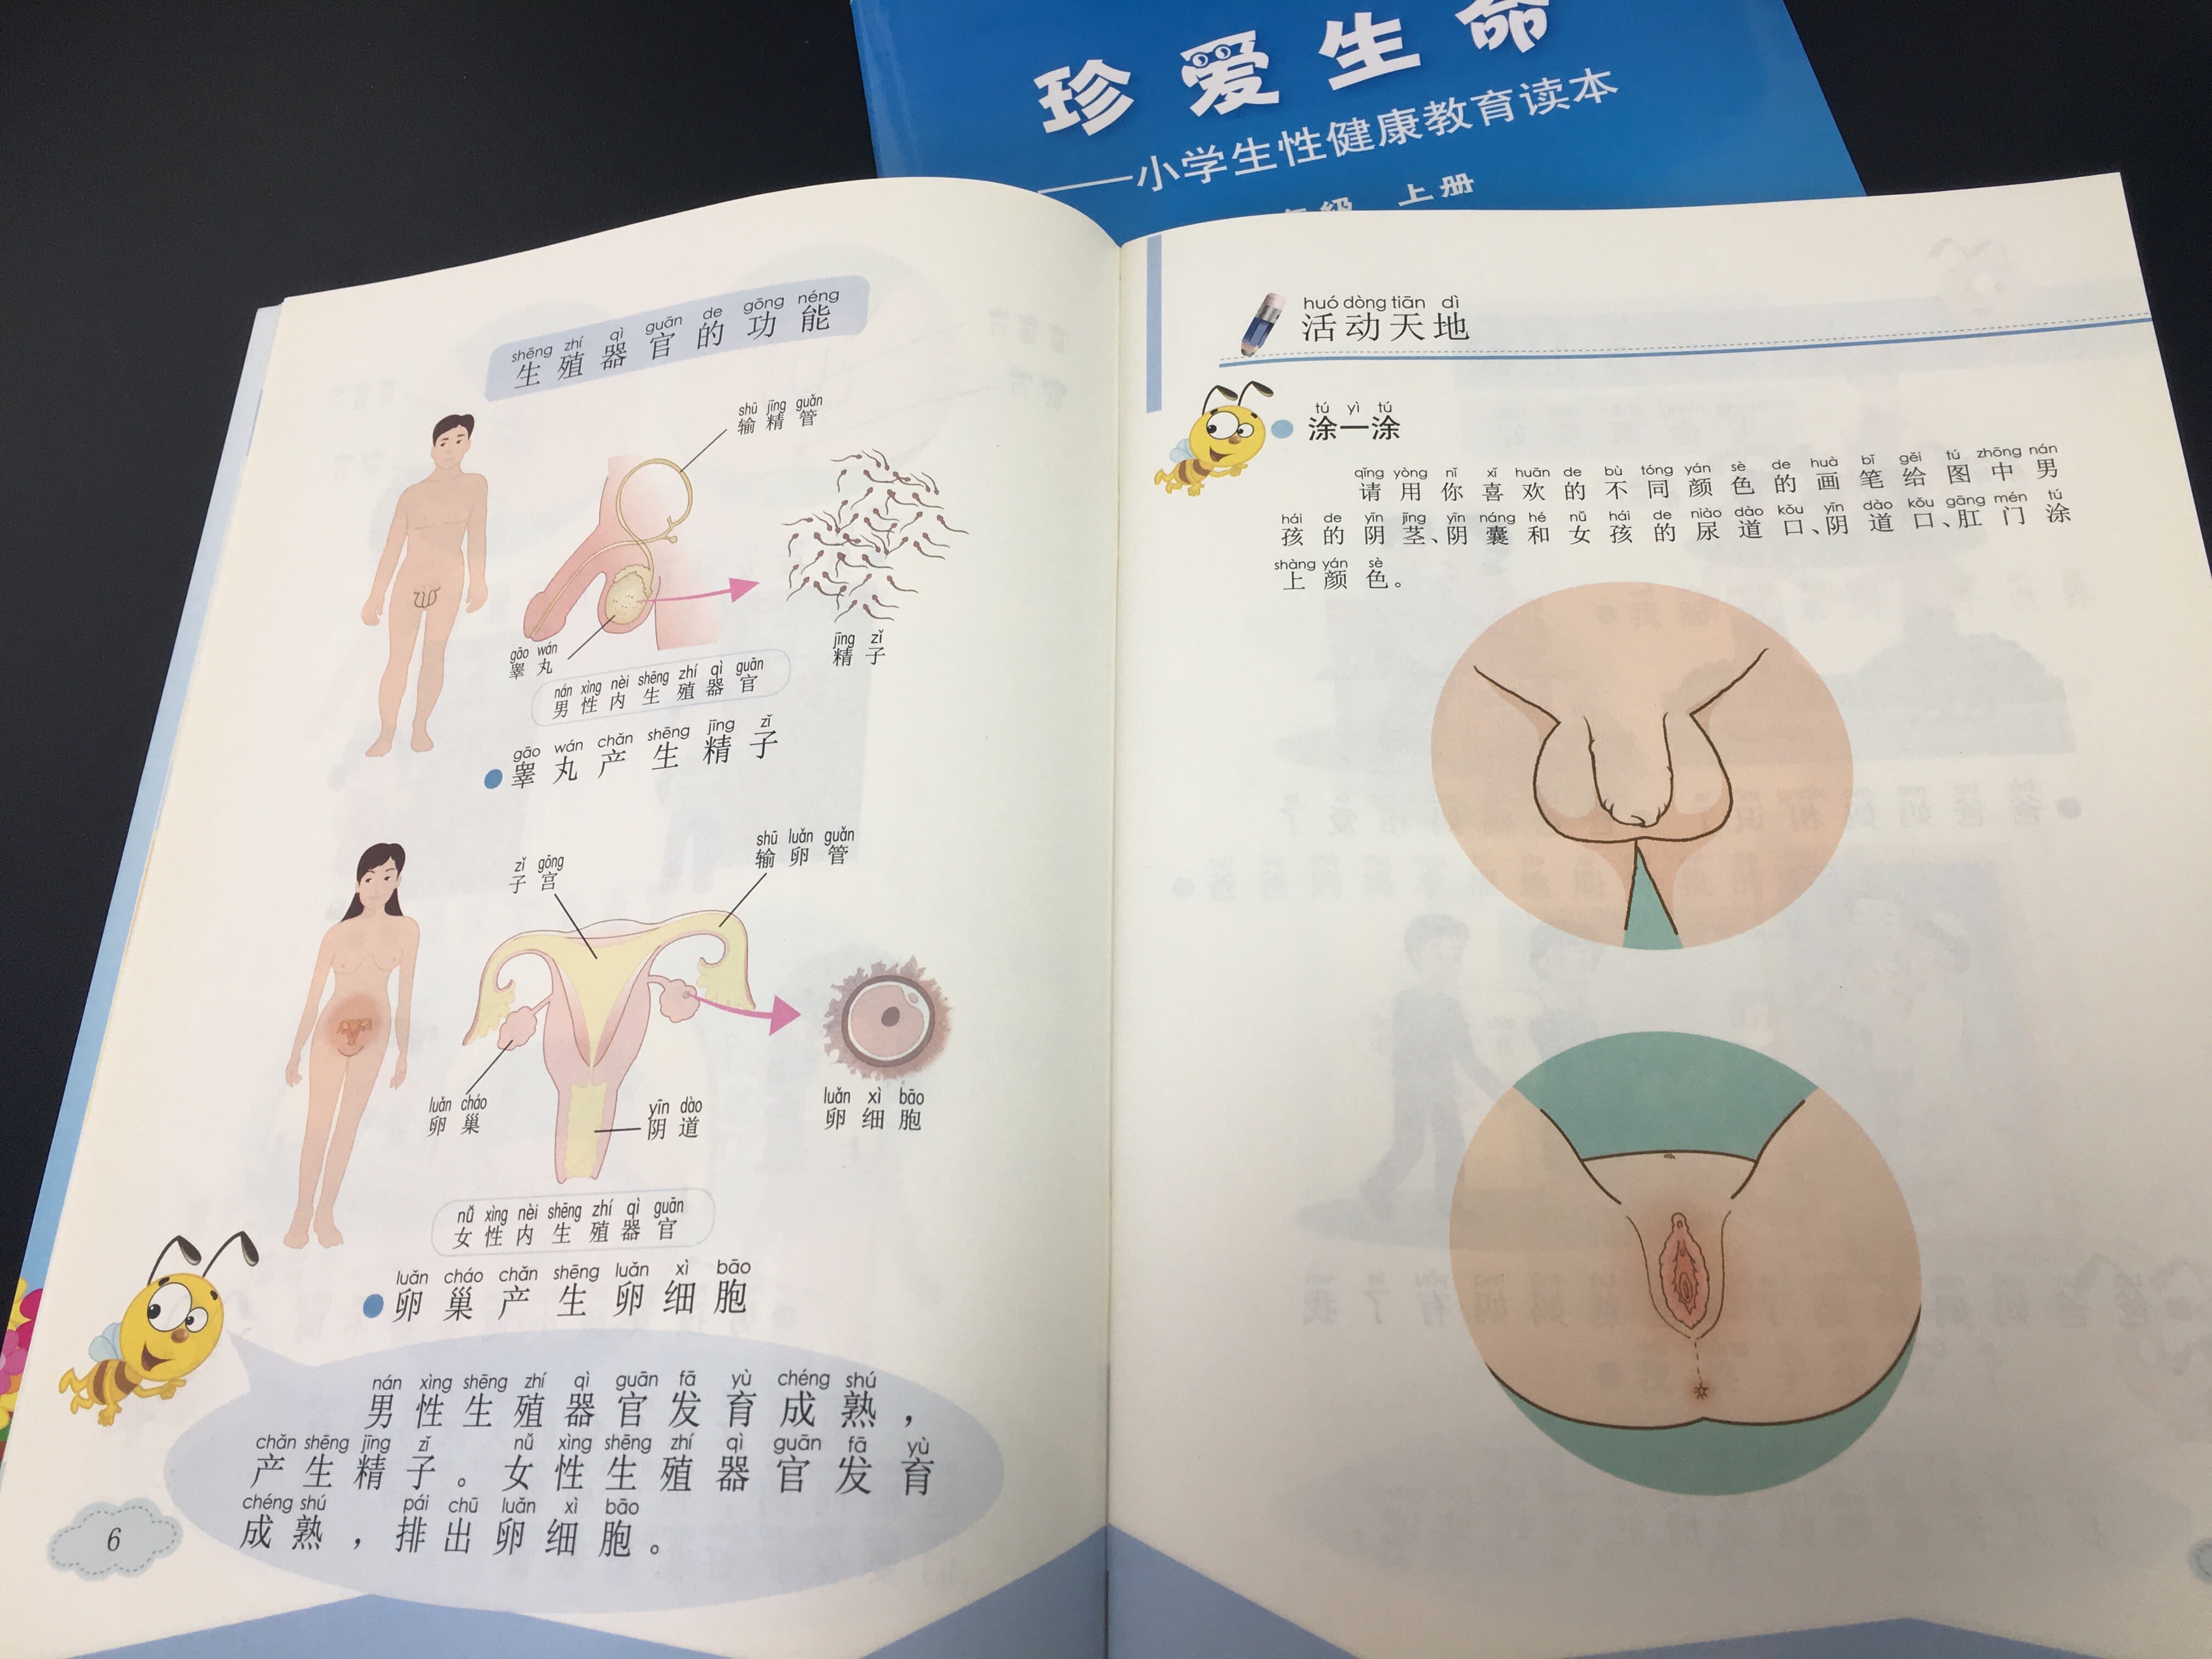 School Porn Sex - Shock and praise for groundbreaking sex-ed textbook in China | CNN